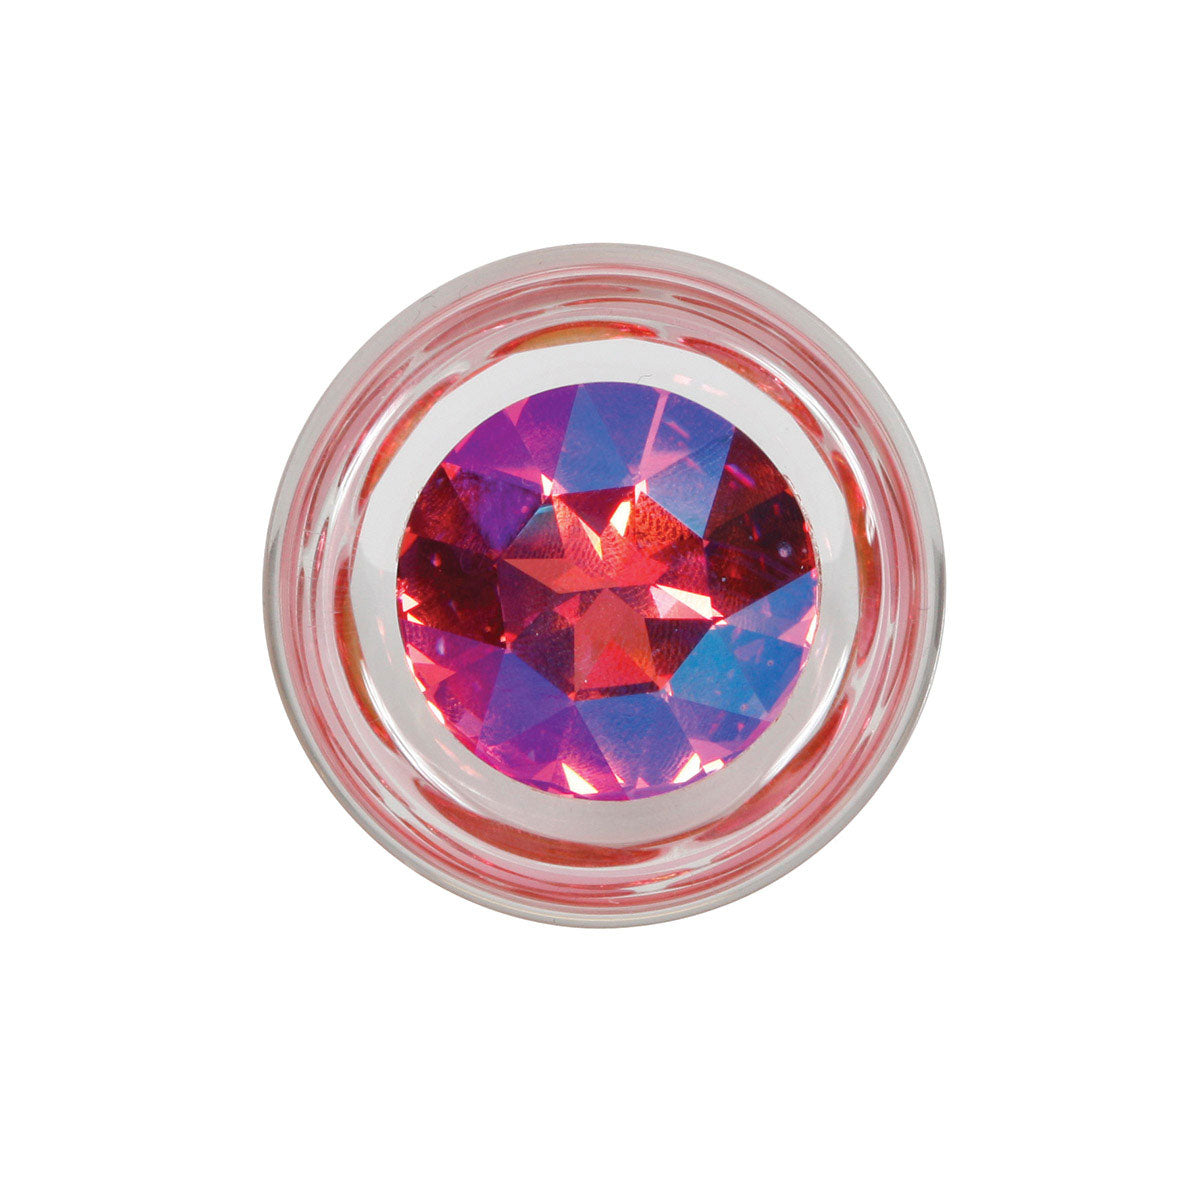 Crystal Delights Pineapple Delight Plug w/ Pink Crystal Crystal Delights